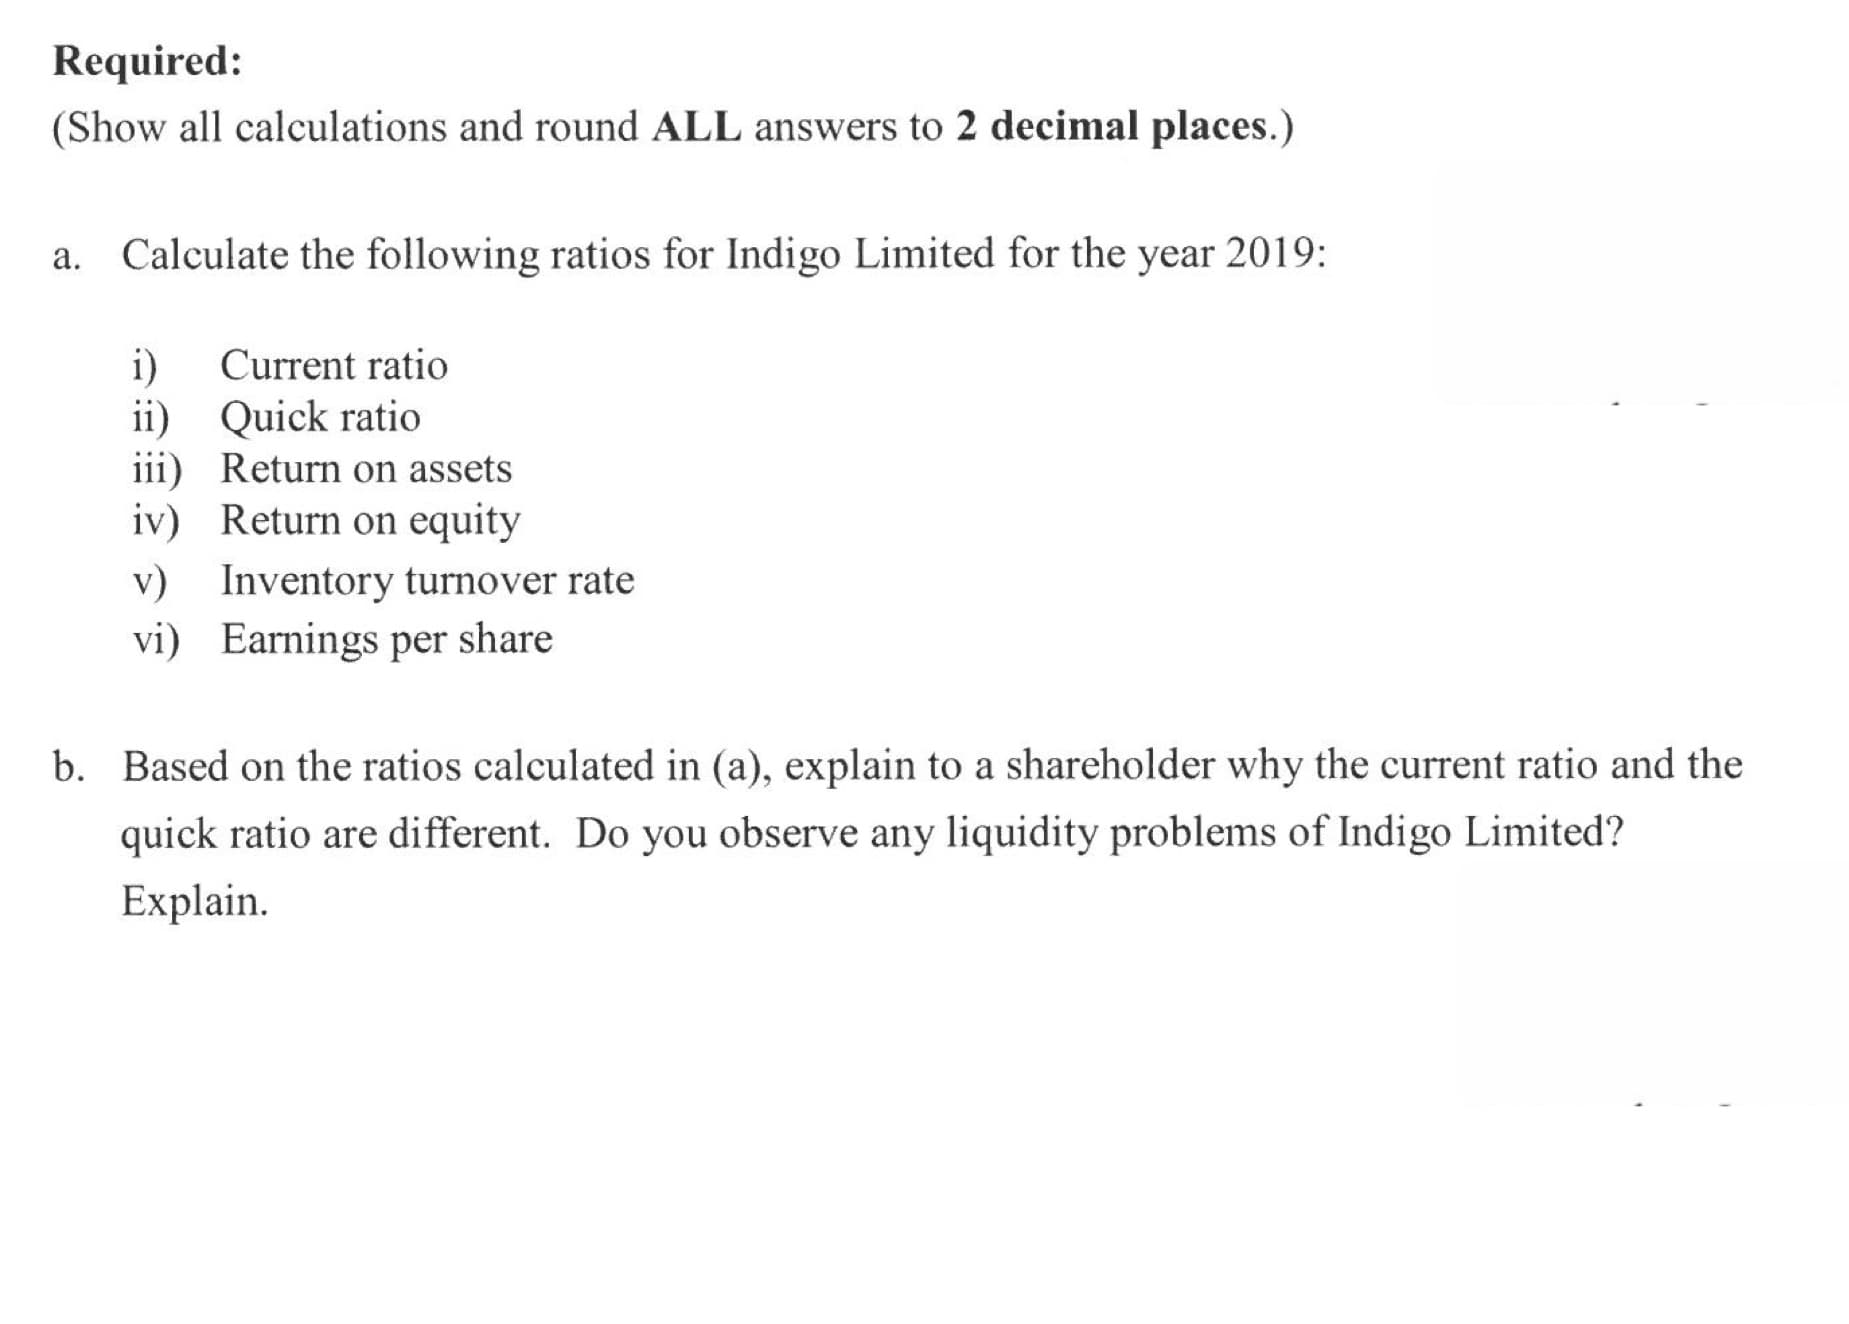 a. Calculate the following ratios for Indigo Limited for the year 2019:
Current ratio
i)
ii) Quick ratio
iii) Return on assets
iv) Return on equity
v) Inventory turnover rate
vi) Earnings per share
b. Based on the ratios calculated in (a), explain to a shareholder why the current ratio and the
quick ratio are different. Do you observe any liquidity problems of Indigo Limited?
Explain.
